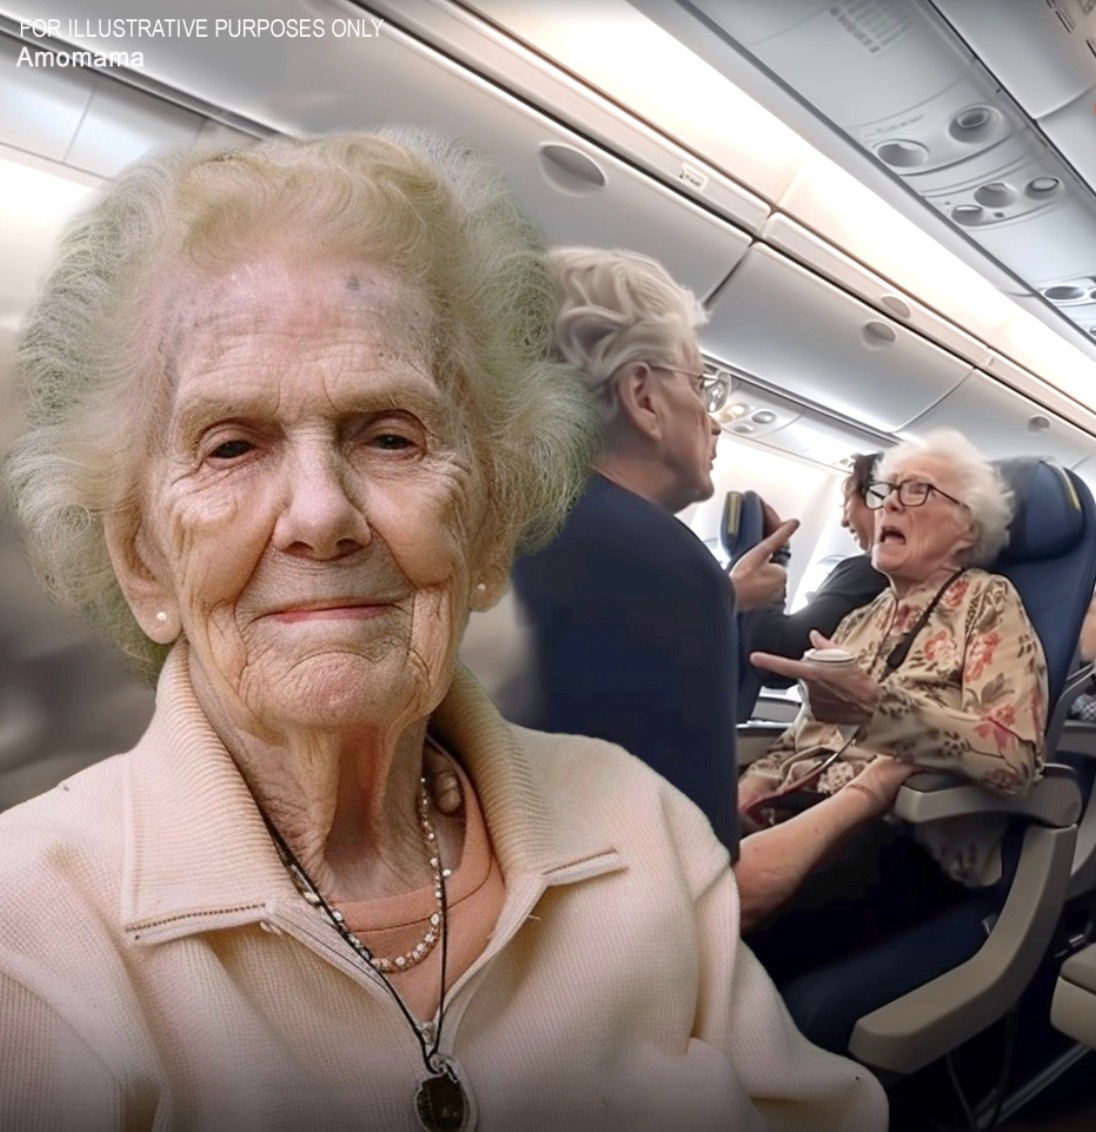 Elderly Woman Shunned in Business Class Until Young Boy’s Picture Drops from Her Purse